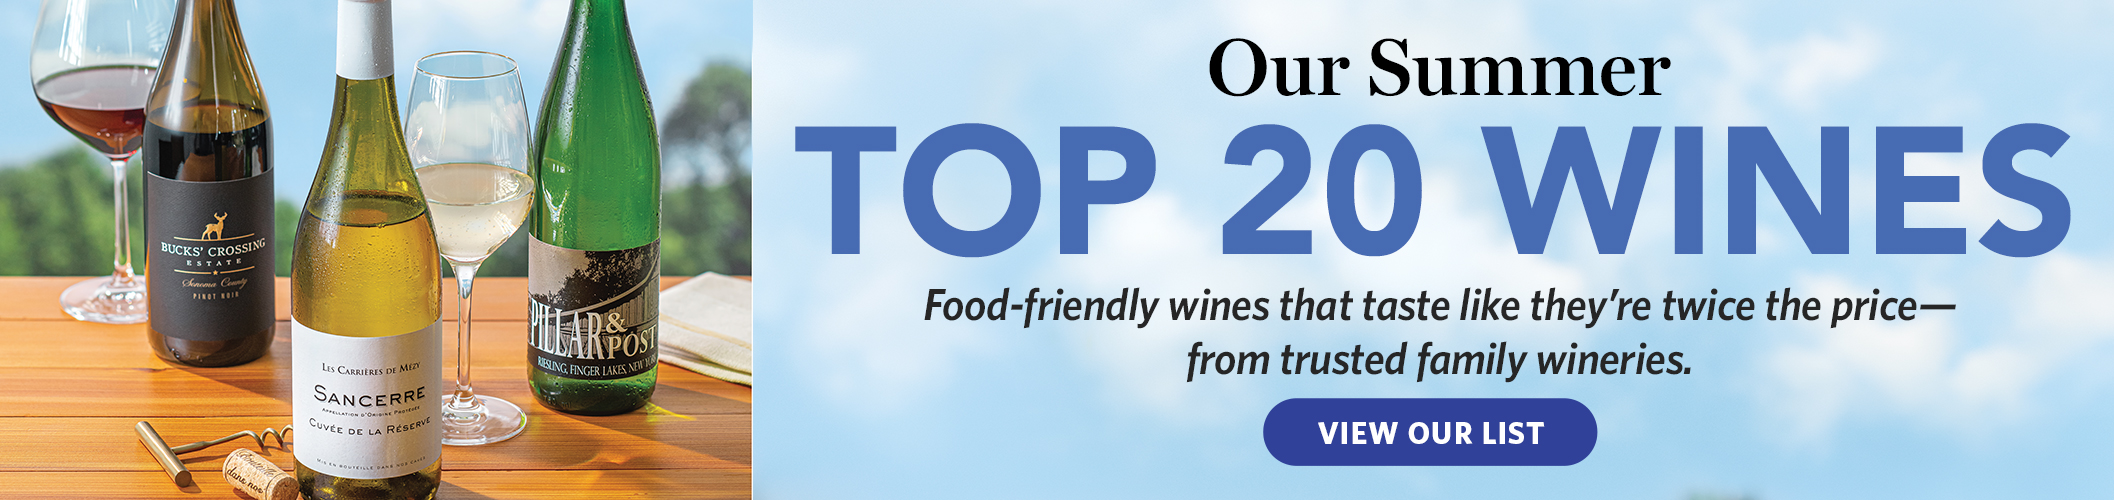 Our Summer Top 20 Wines - View Our List